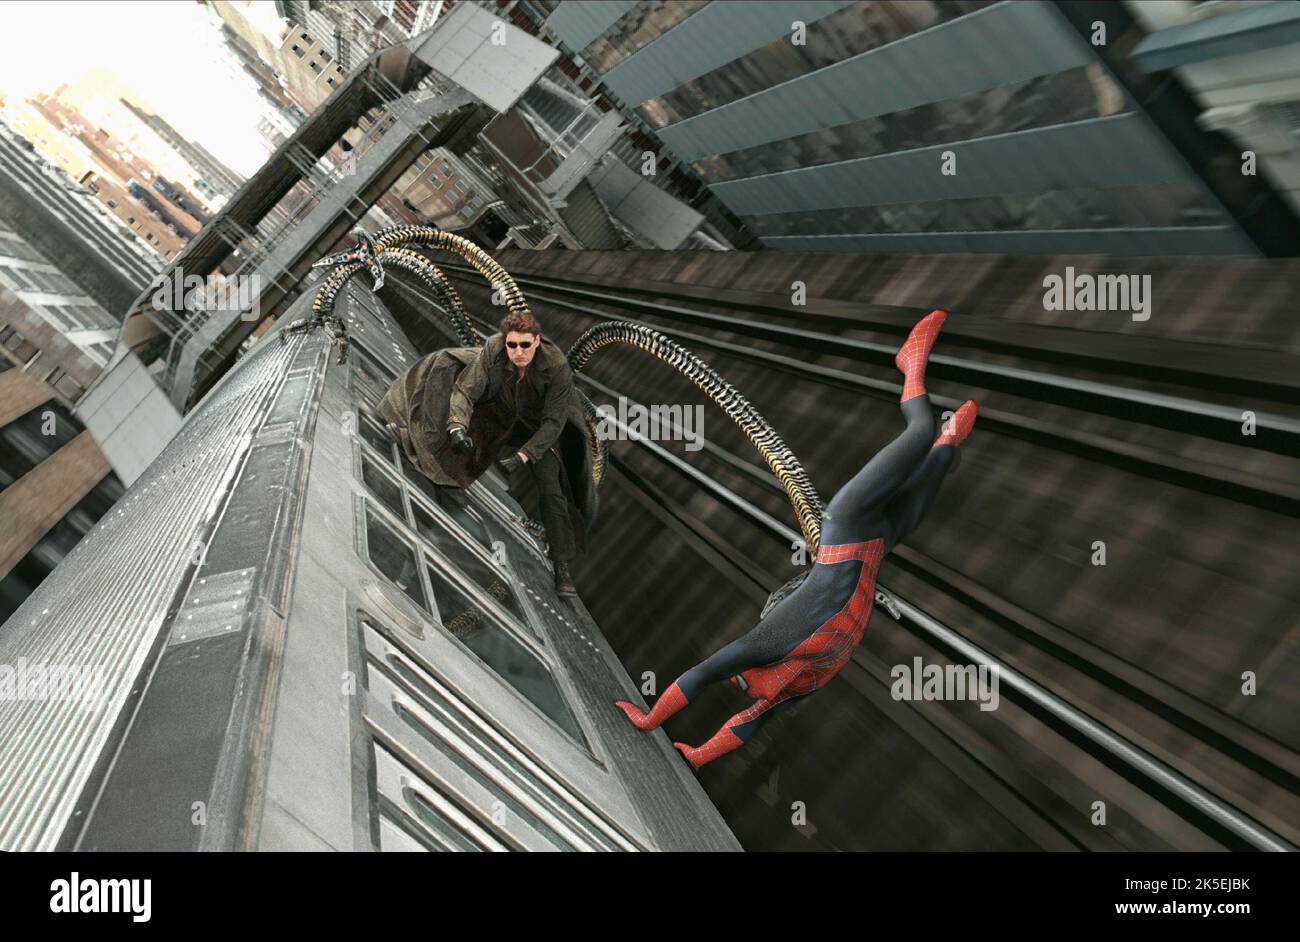 ALFRED MOLINA, TOBEY MAGUIRE, SPIDER-MAN 2, 2004 Stock Photo